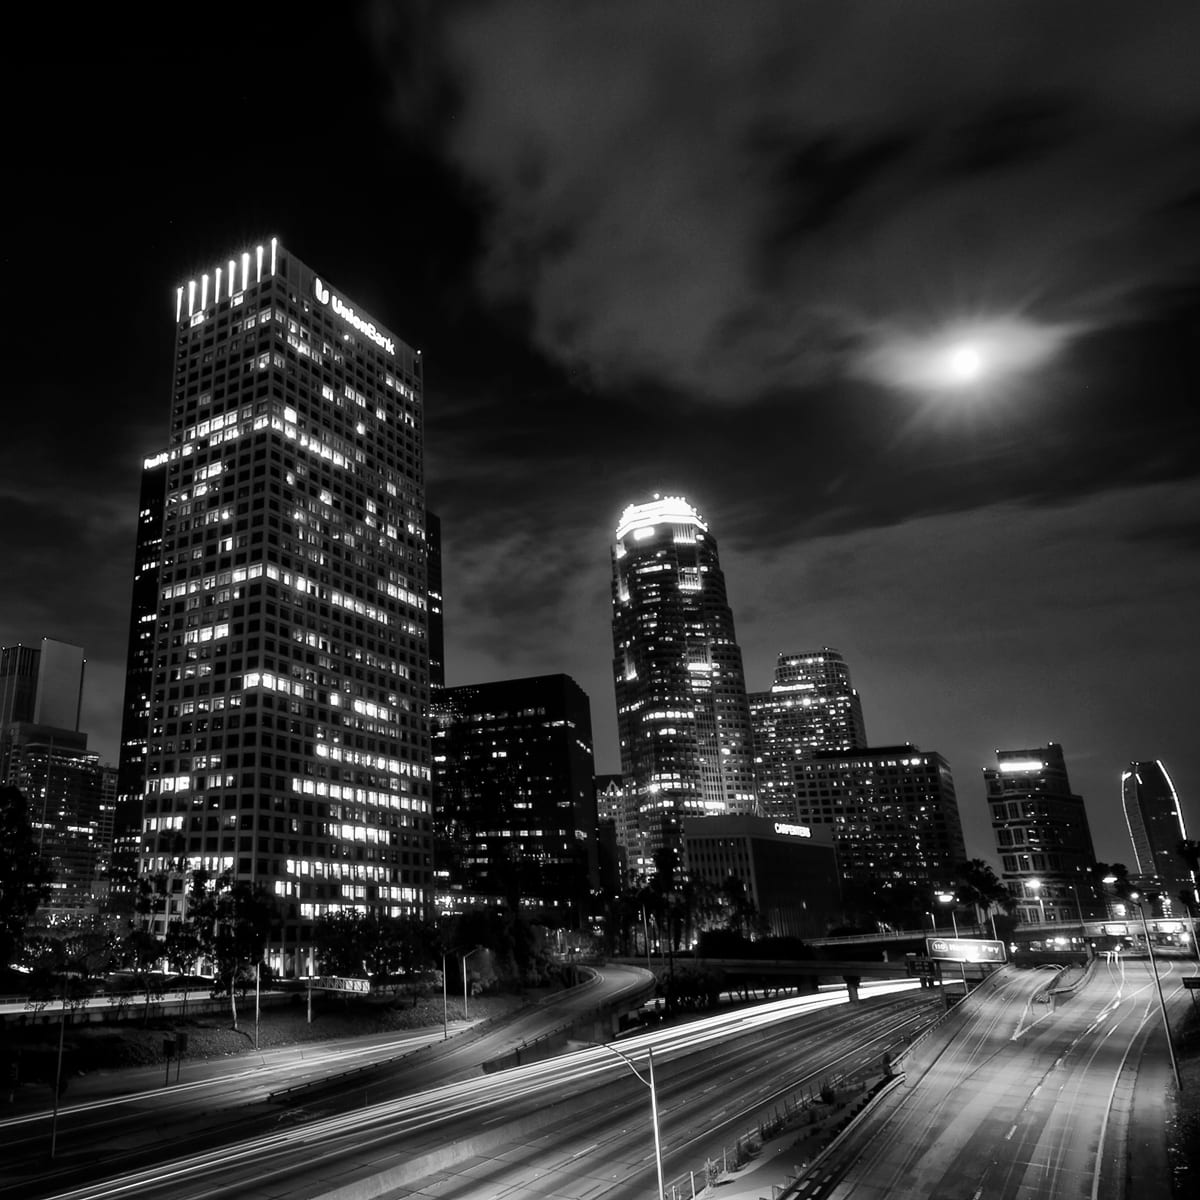 Full Moon over DTLA by Mark Peacock  Image: Photograph